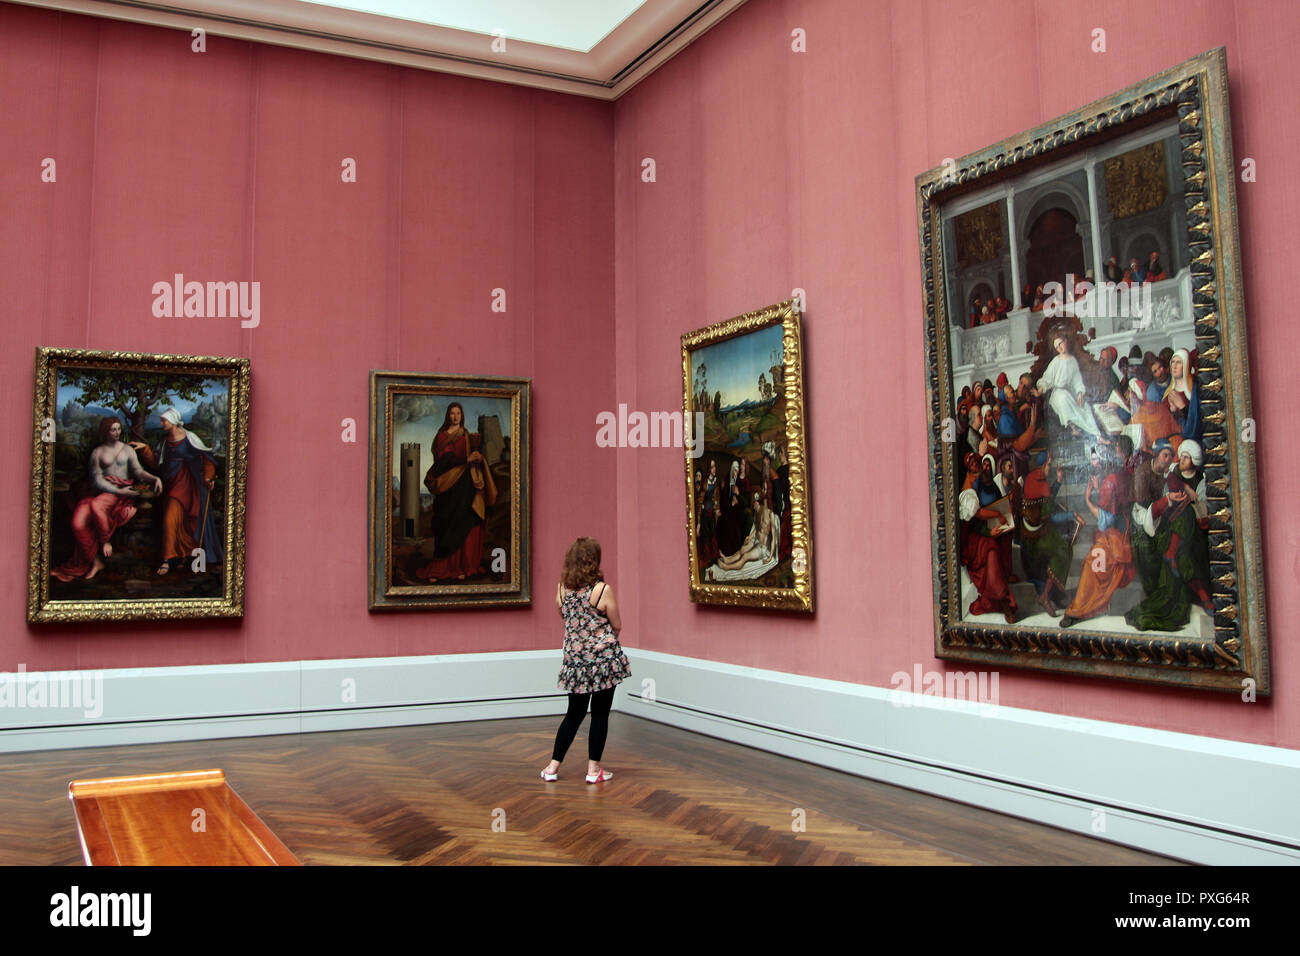 A lone art lover admiring the paintings in this art gallery in the German city of Berlin. Stock Photo